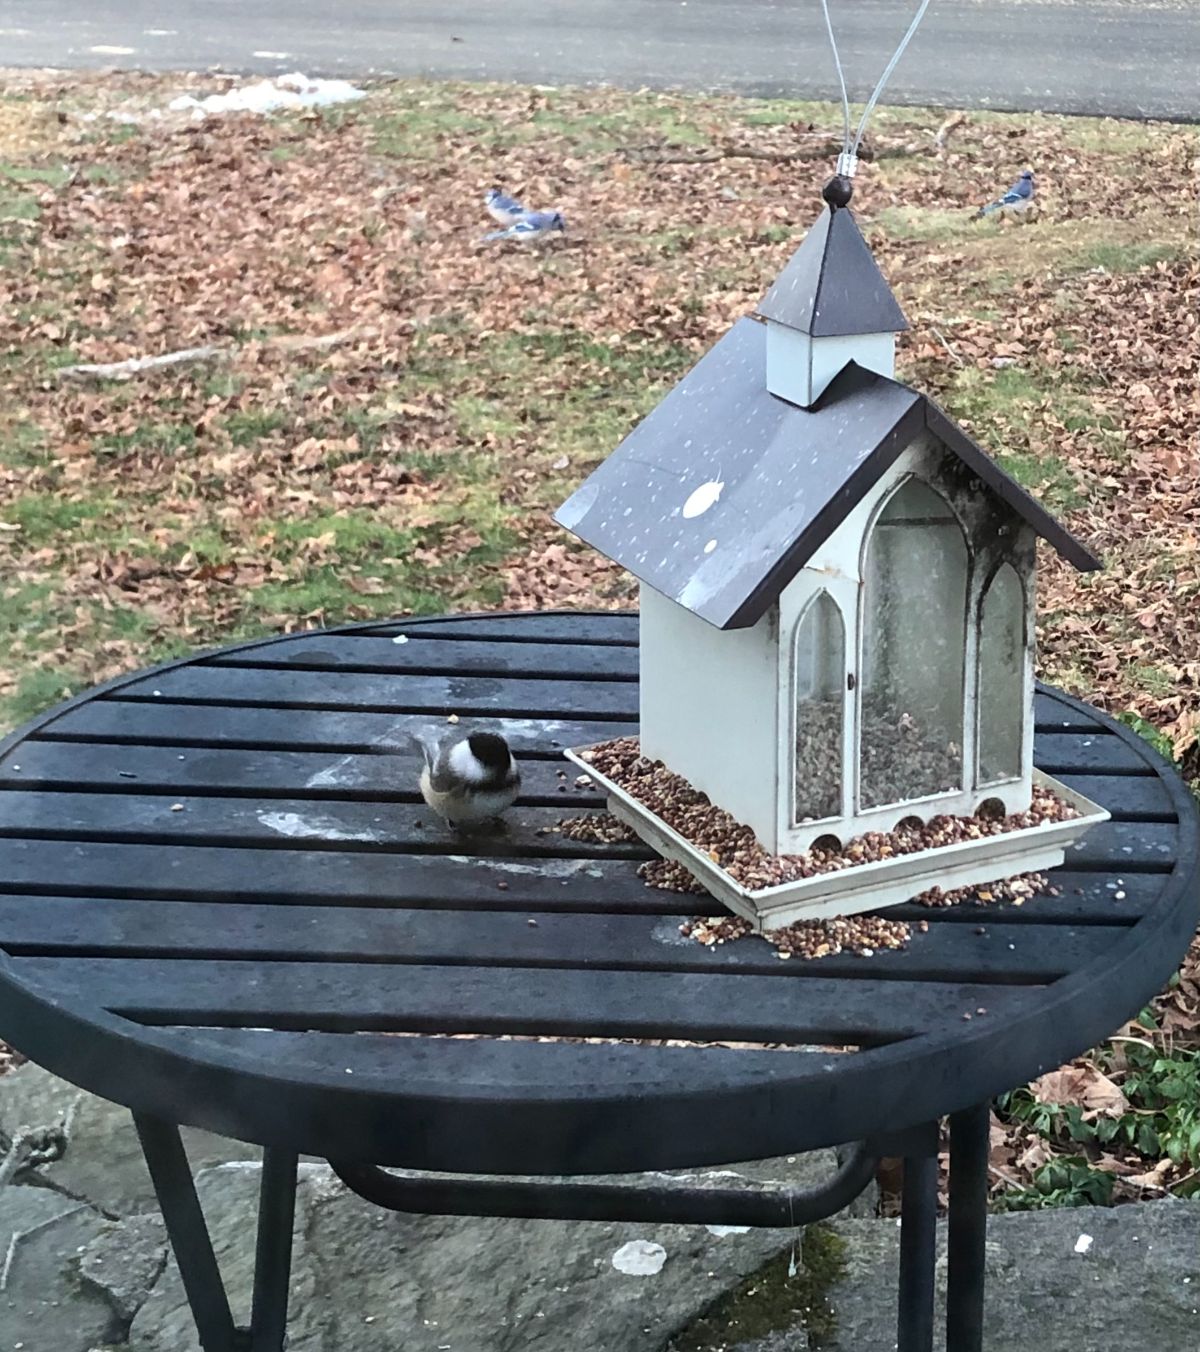 A chickadee on a table at a feeder